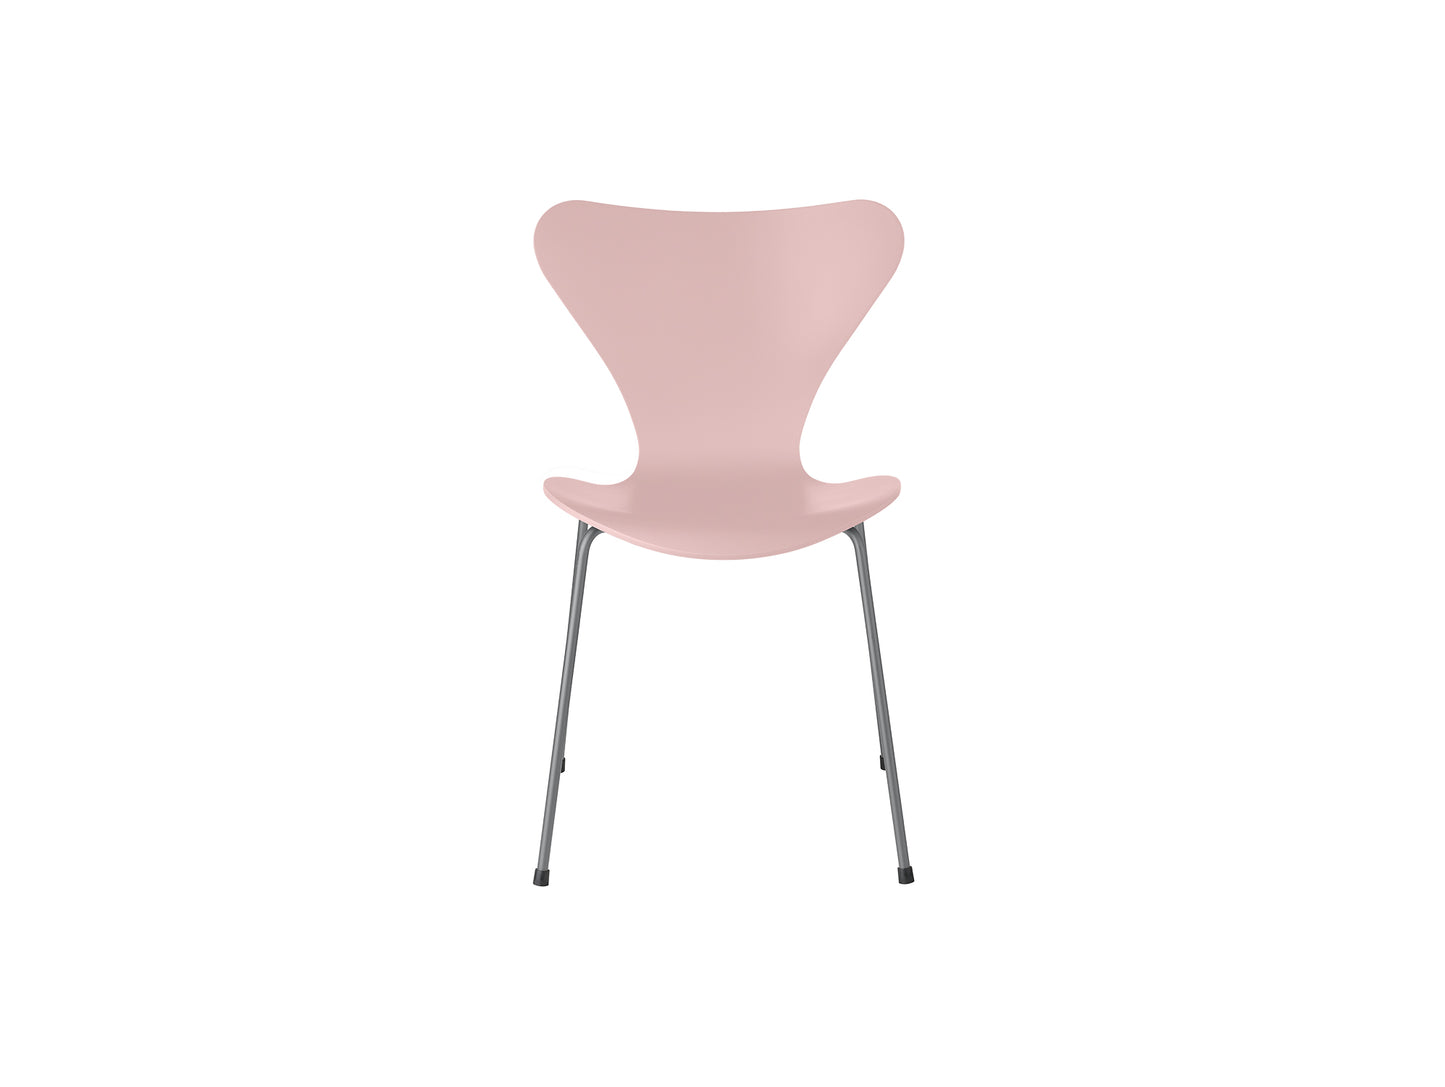 Series 7™ 3107 Dining Chair by Fritz Hansen - Pale Rose Lacquered Veneer Shell / Silver Grey Steel